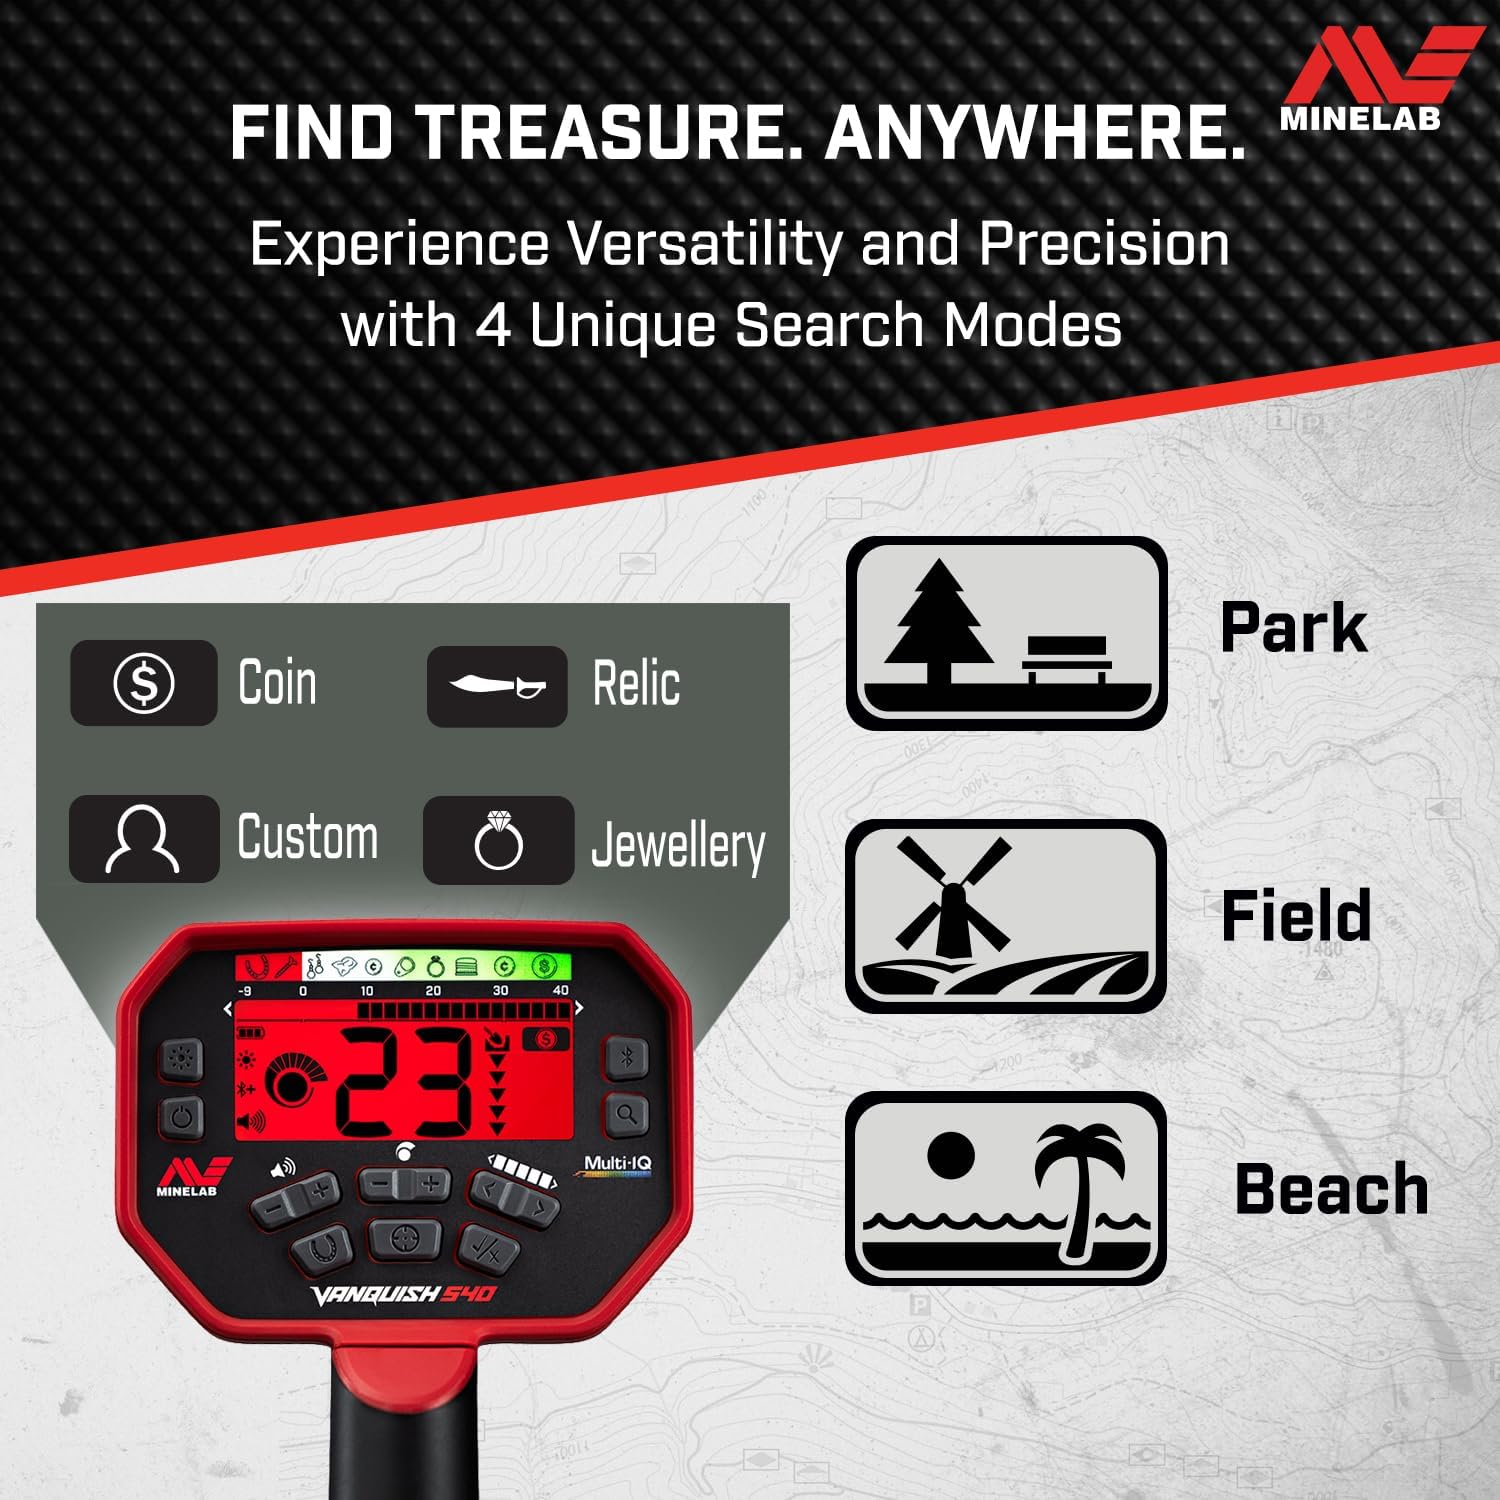 Minelab Vanquish 540 Multi-Frequency Pinpointing Metal Detector